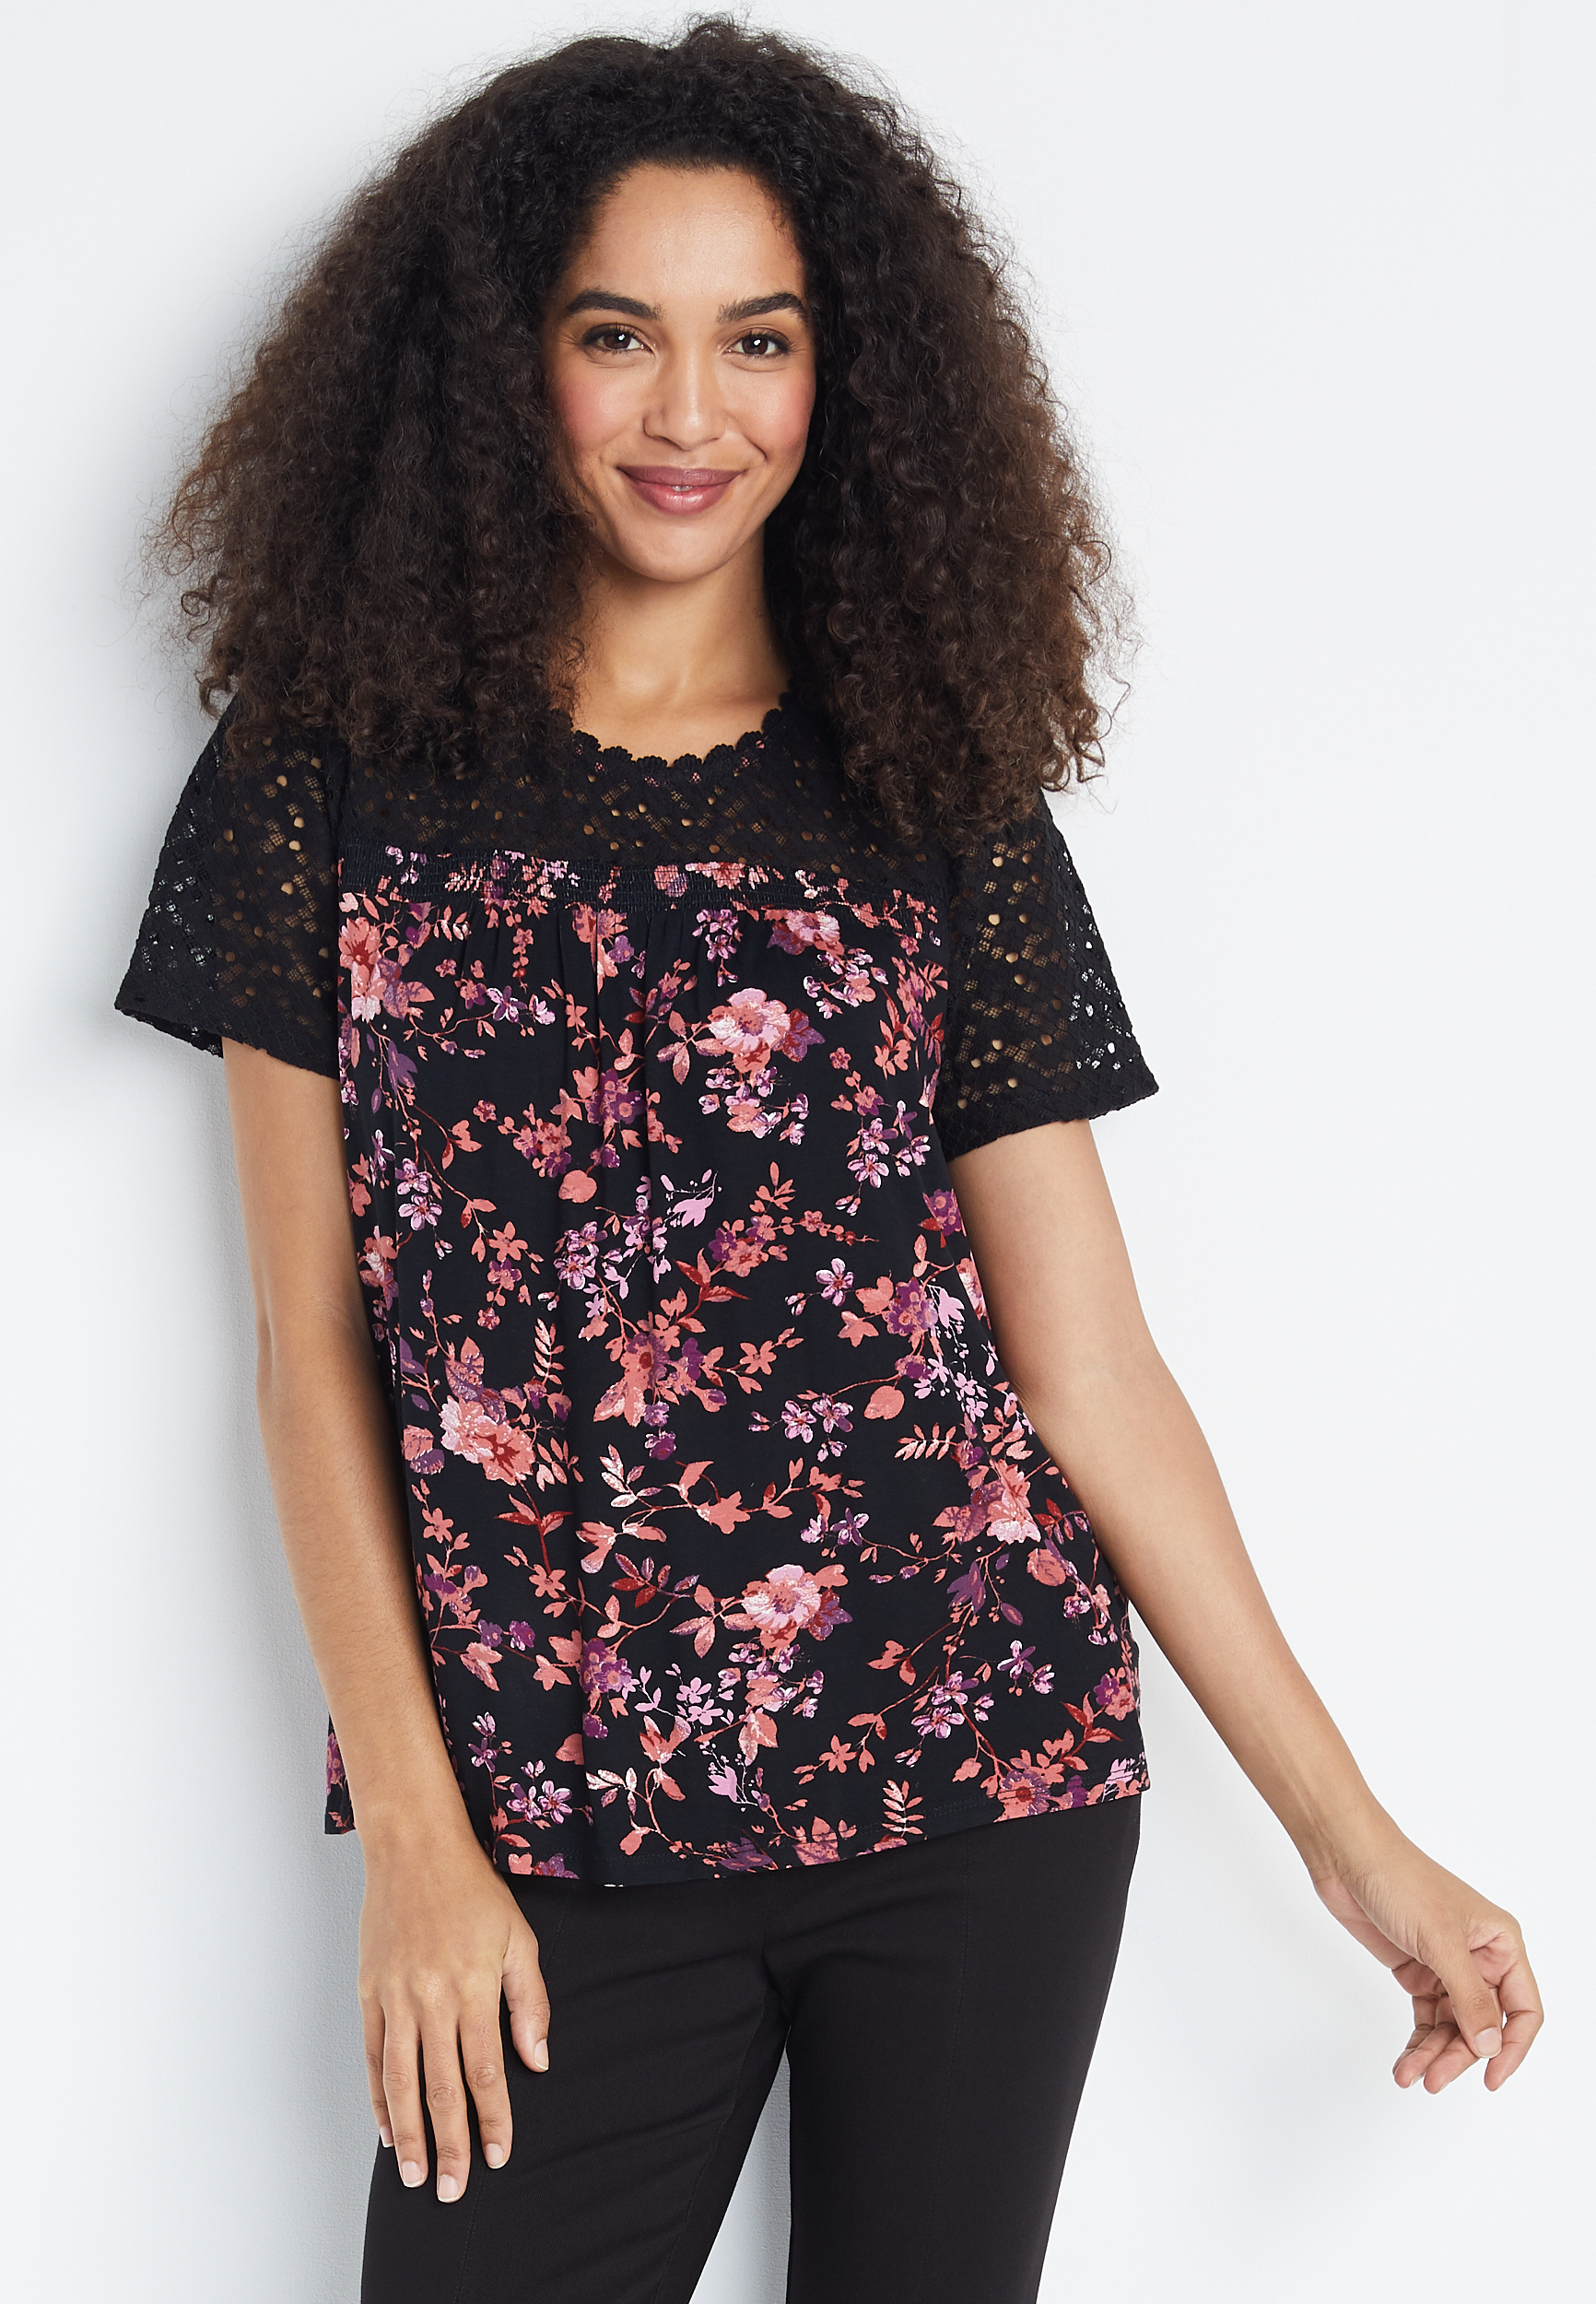 Black Floral Lace Top | maurices